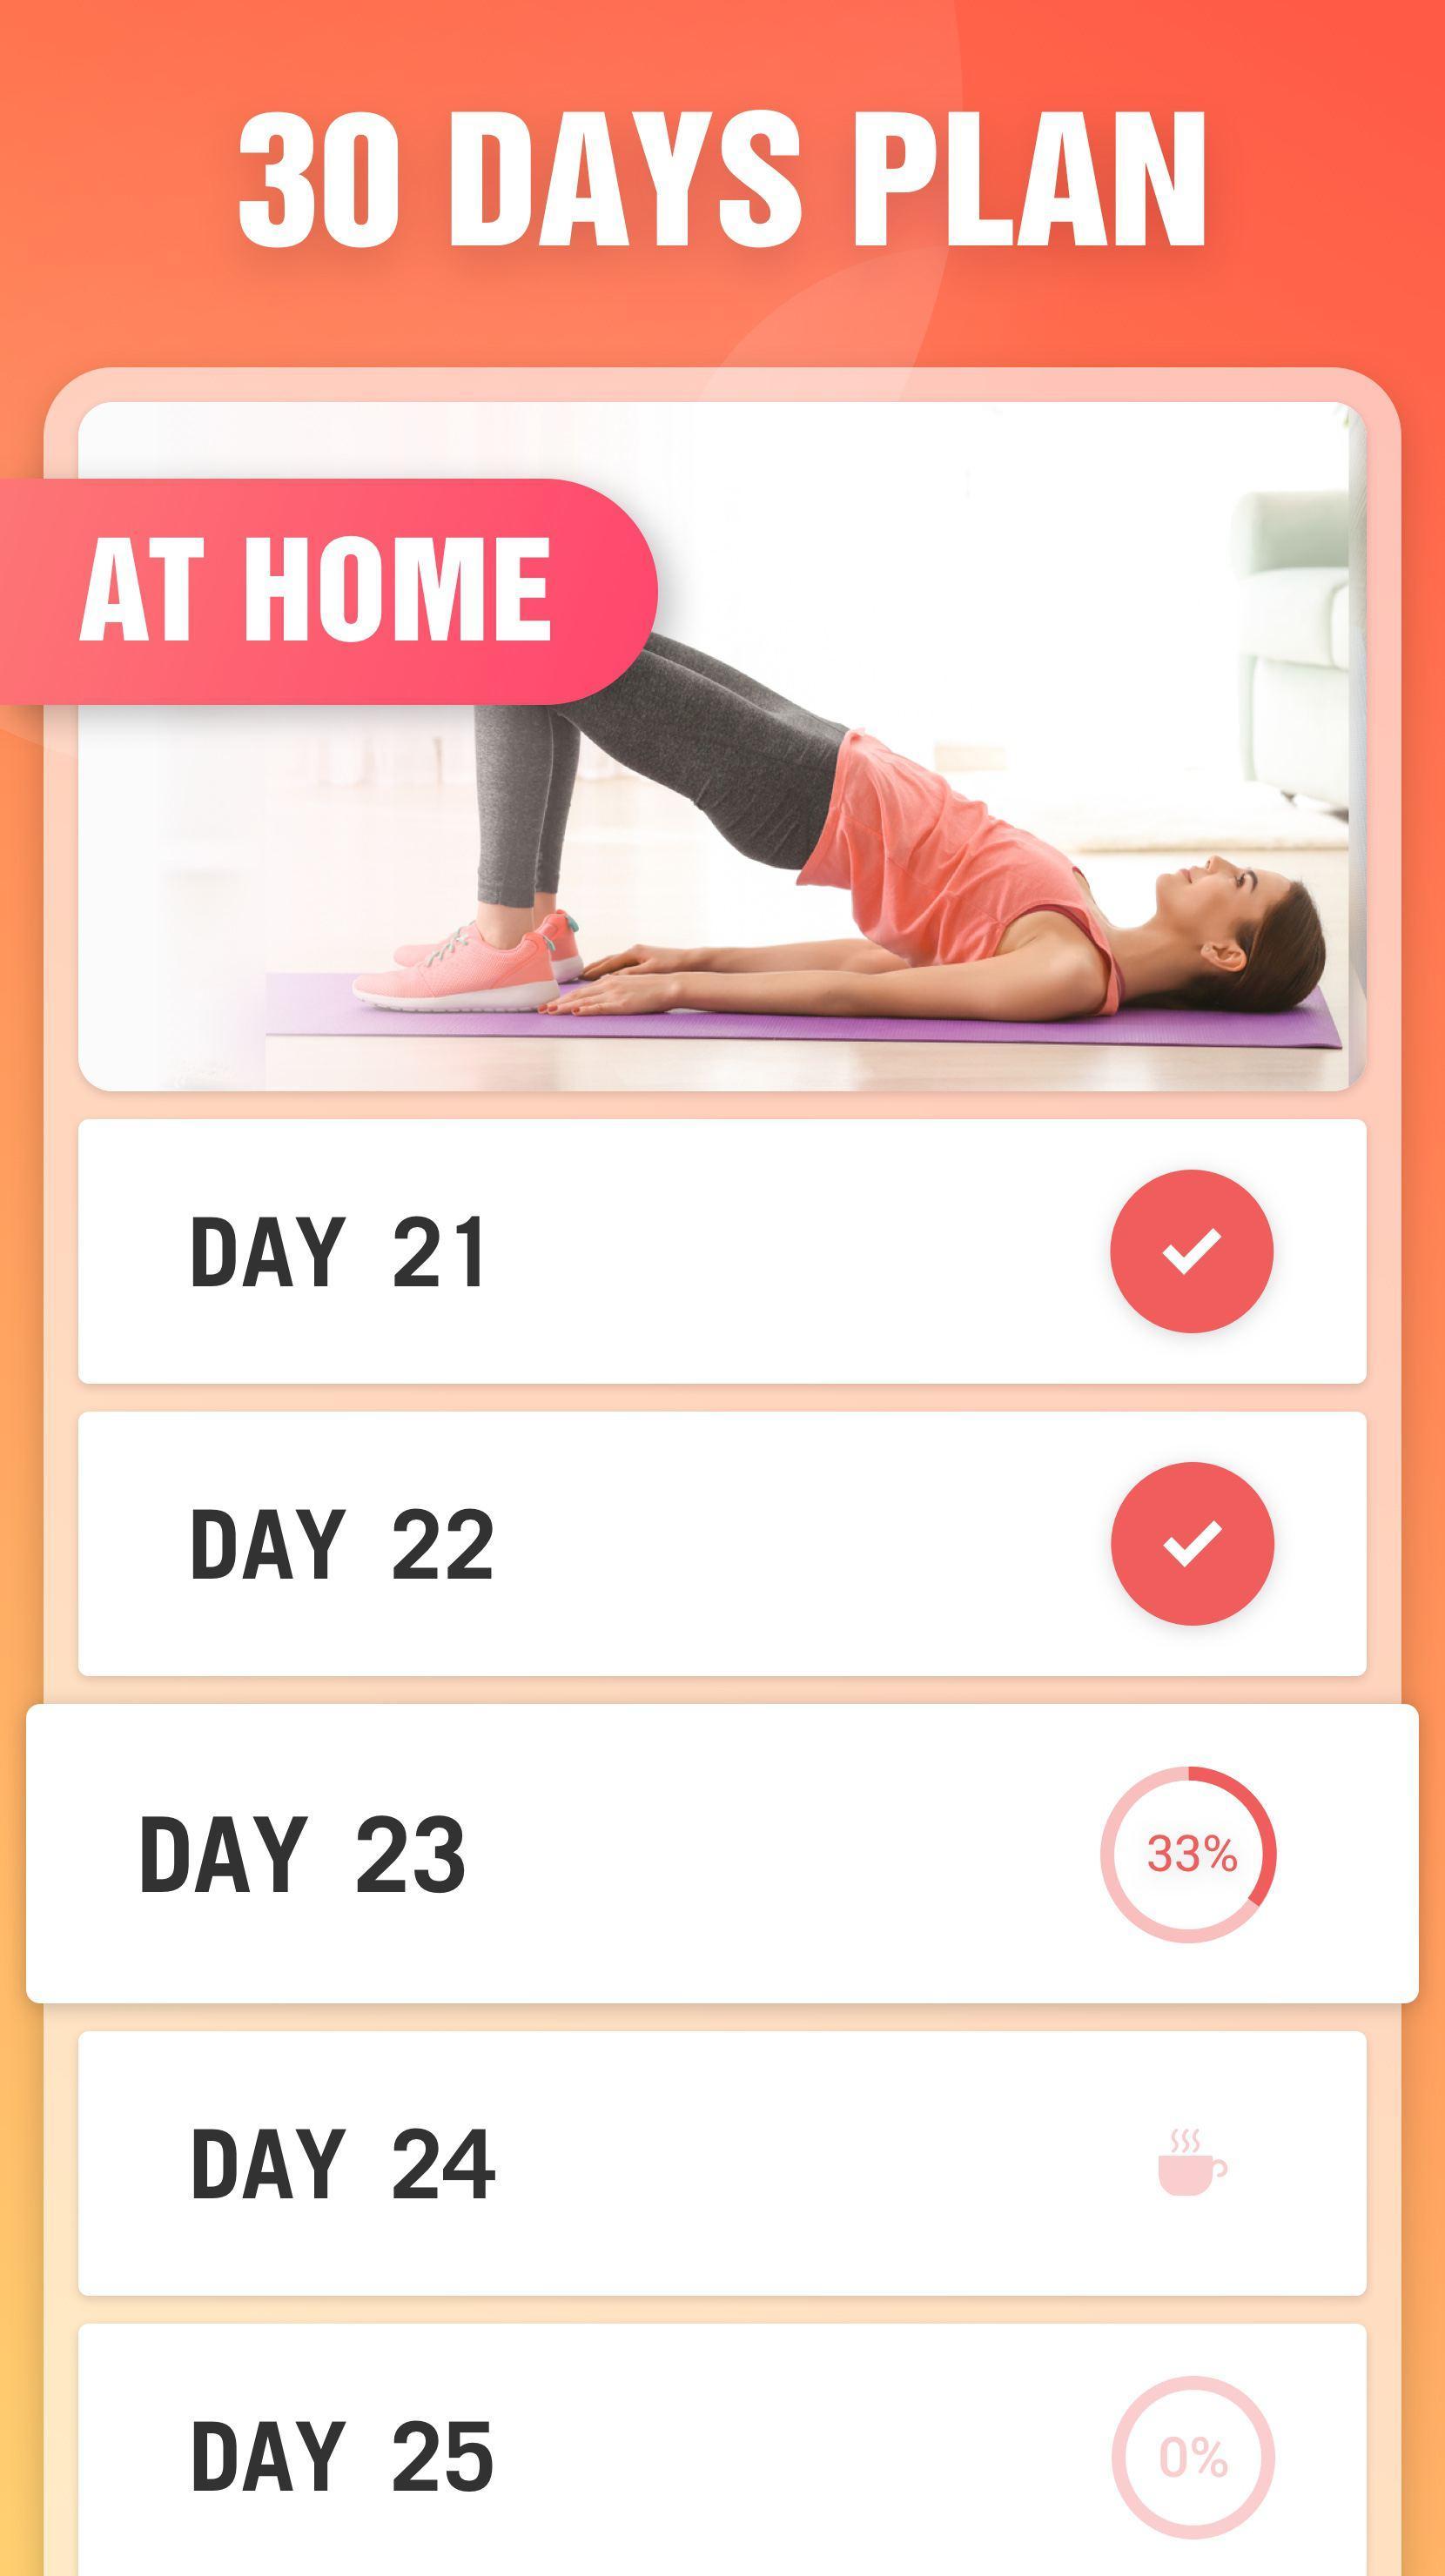 Lose Weight at Home - Home Workout in 30 Days 1.0.57 Screenshot 18